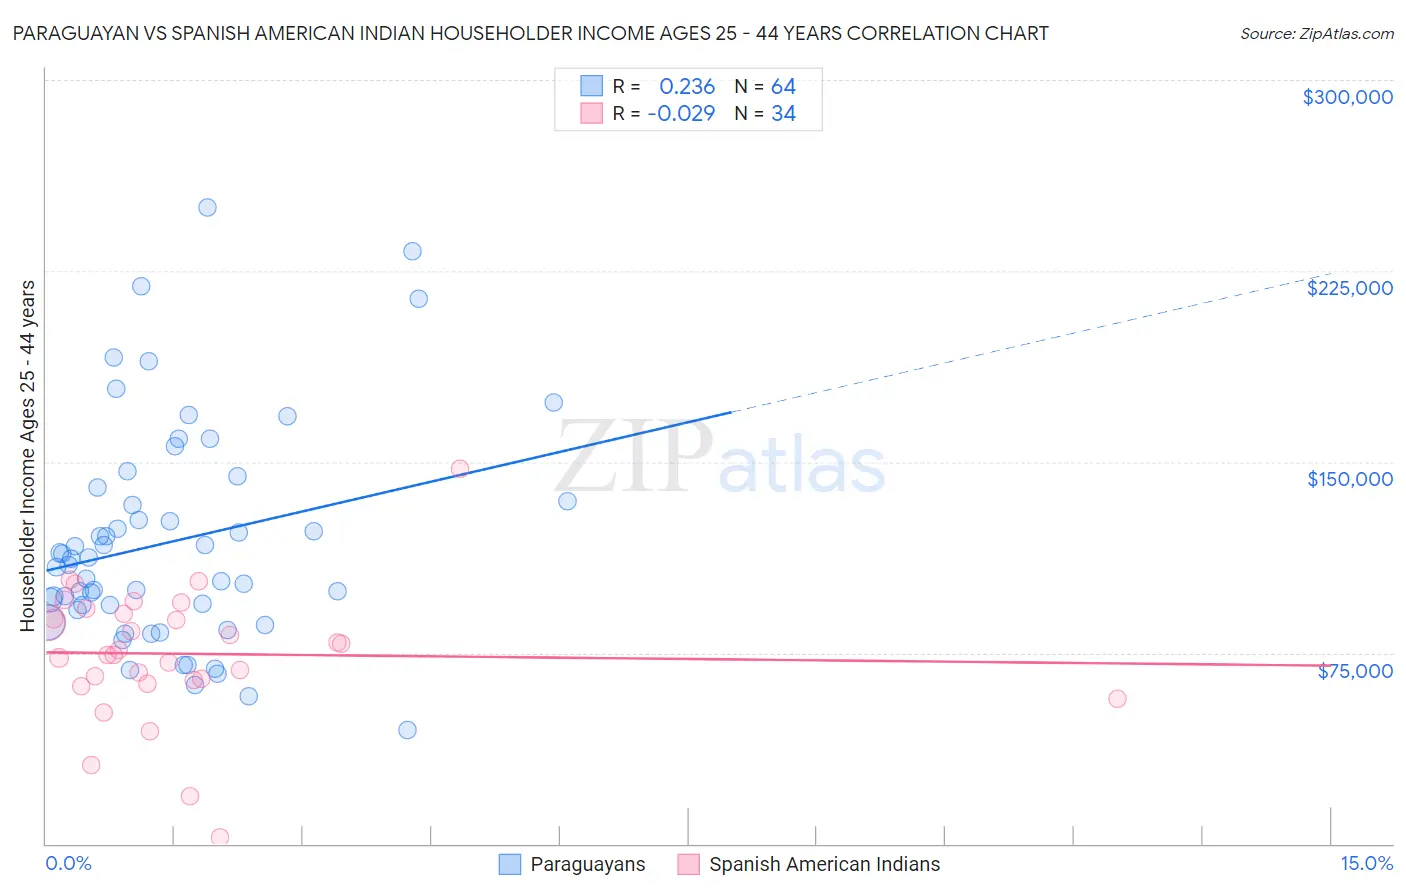 Paraguayan vs Spanish American Indian Householder Income Ages 25 - 44 years